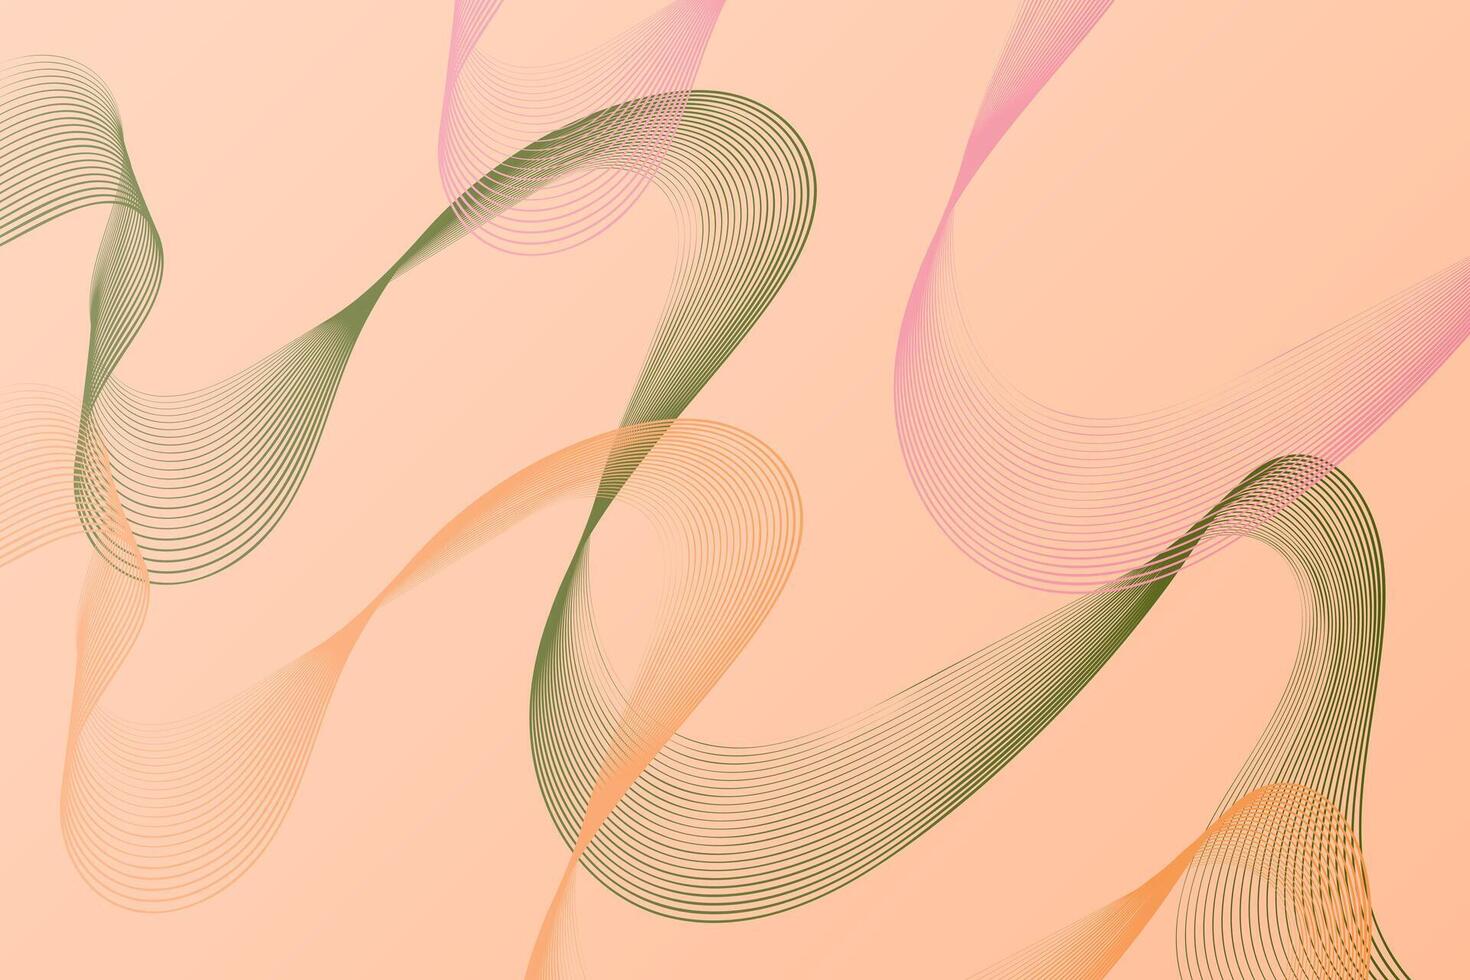 Vibrant and dynamic abstract background featuring wavy lines in pink and green hues vector